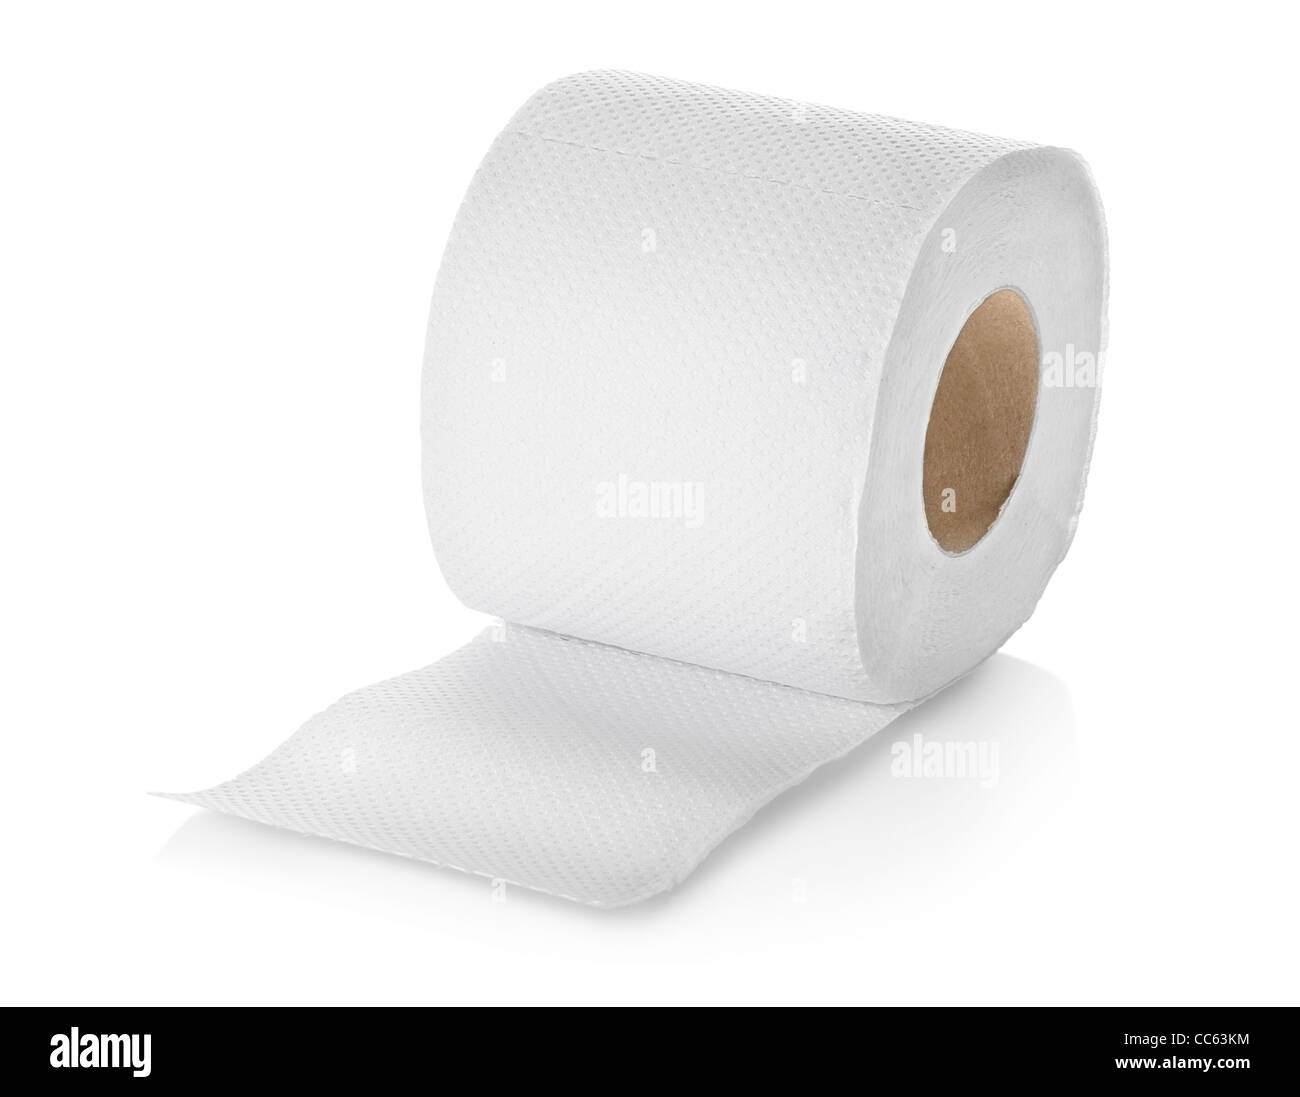 Roll of toilet paper isolated on white background Stock Photo